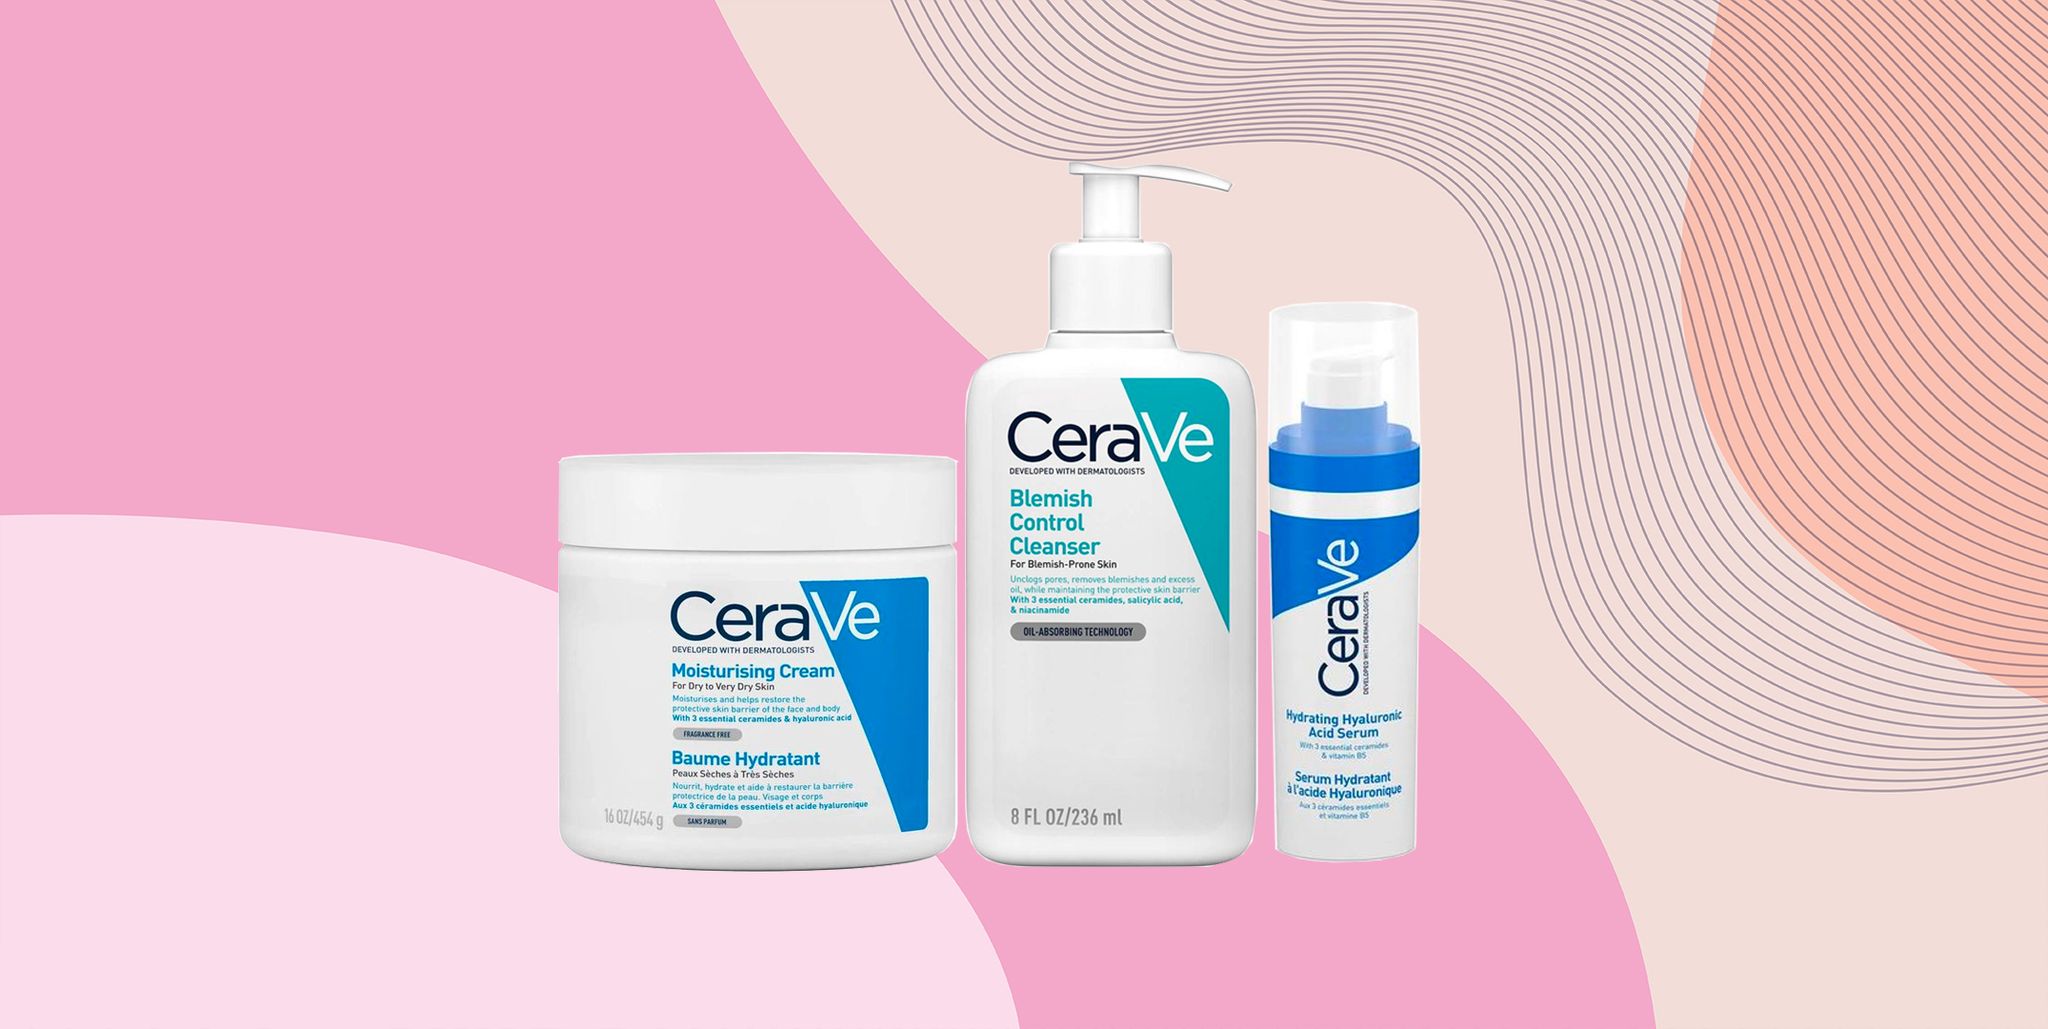 What to buy from CeraVe skincare